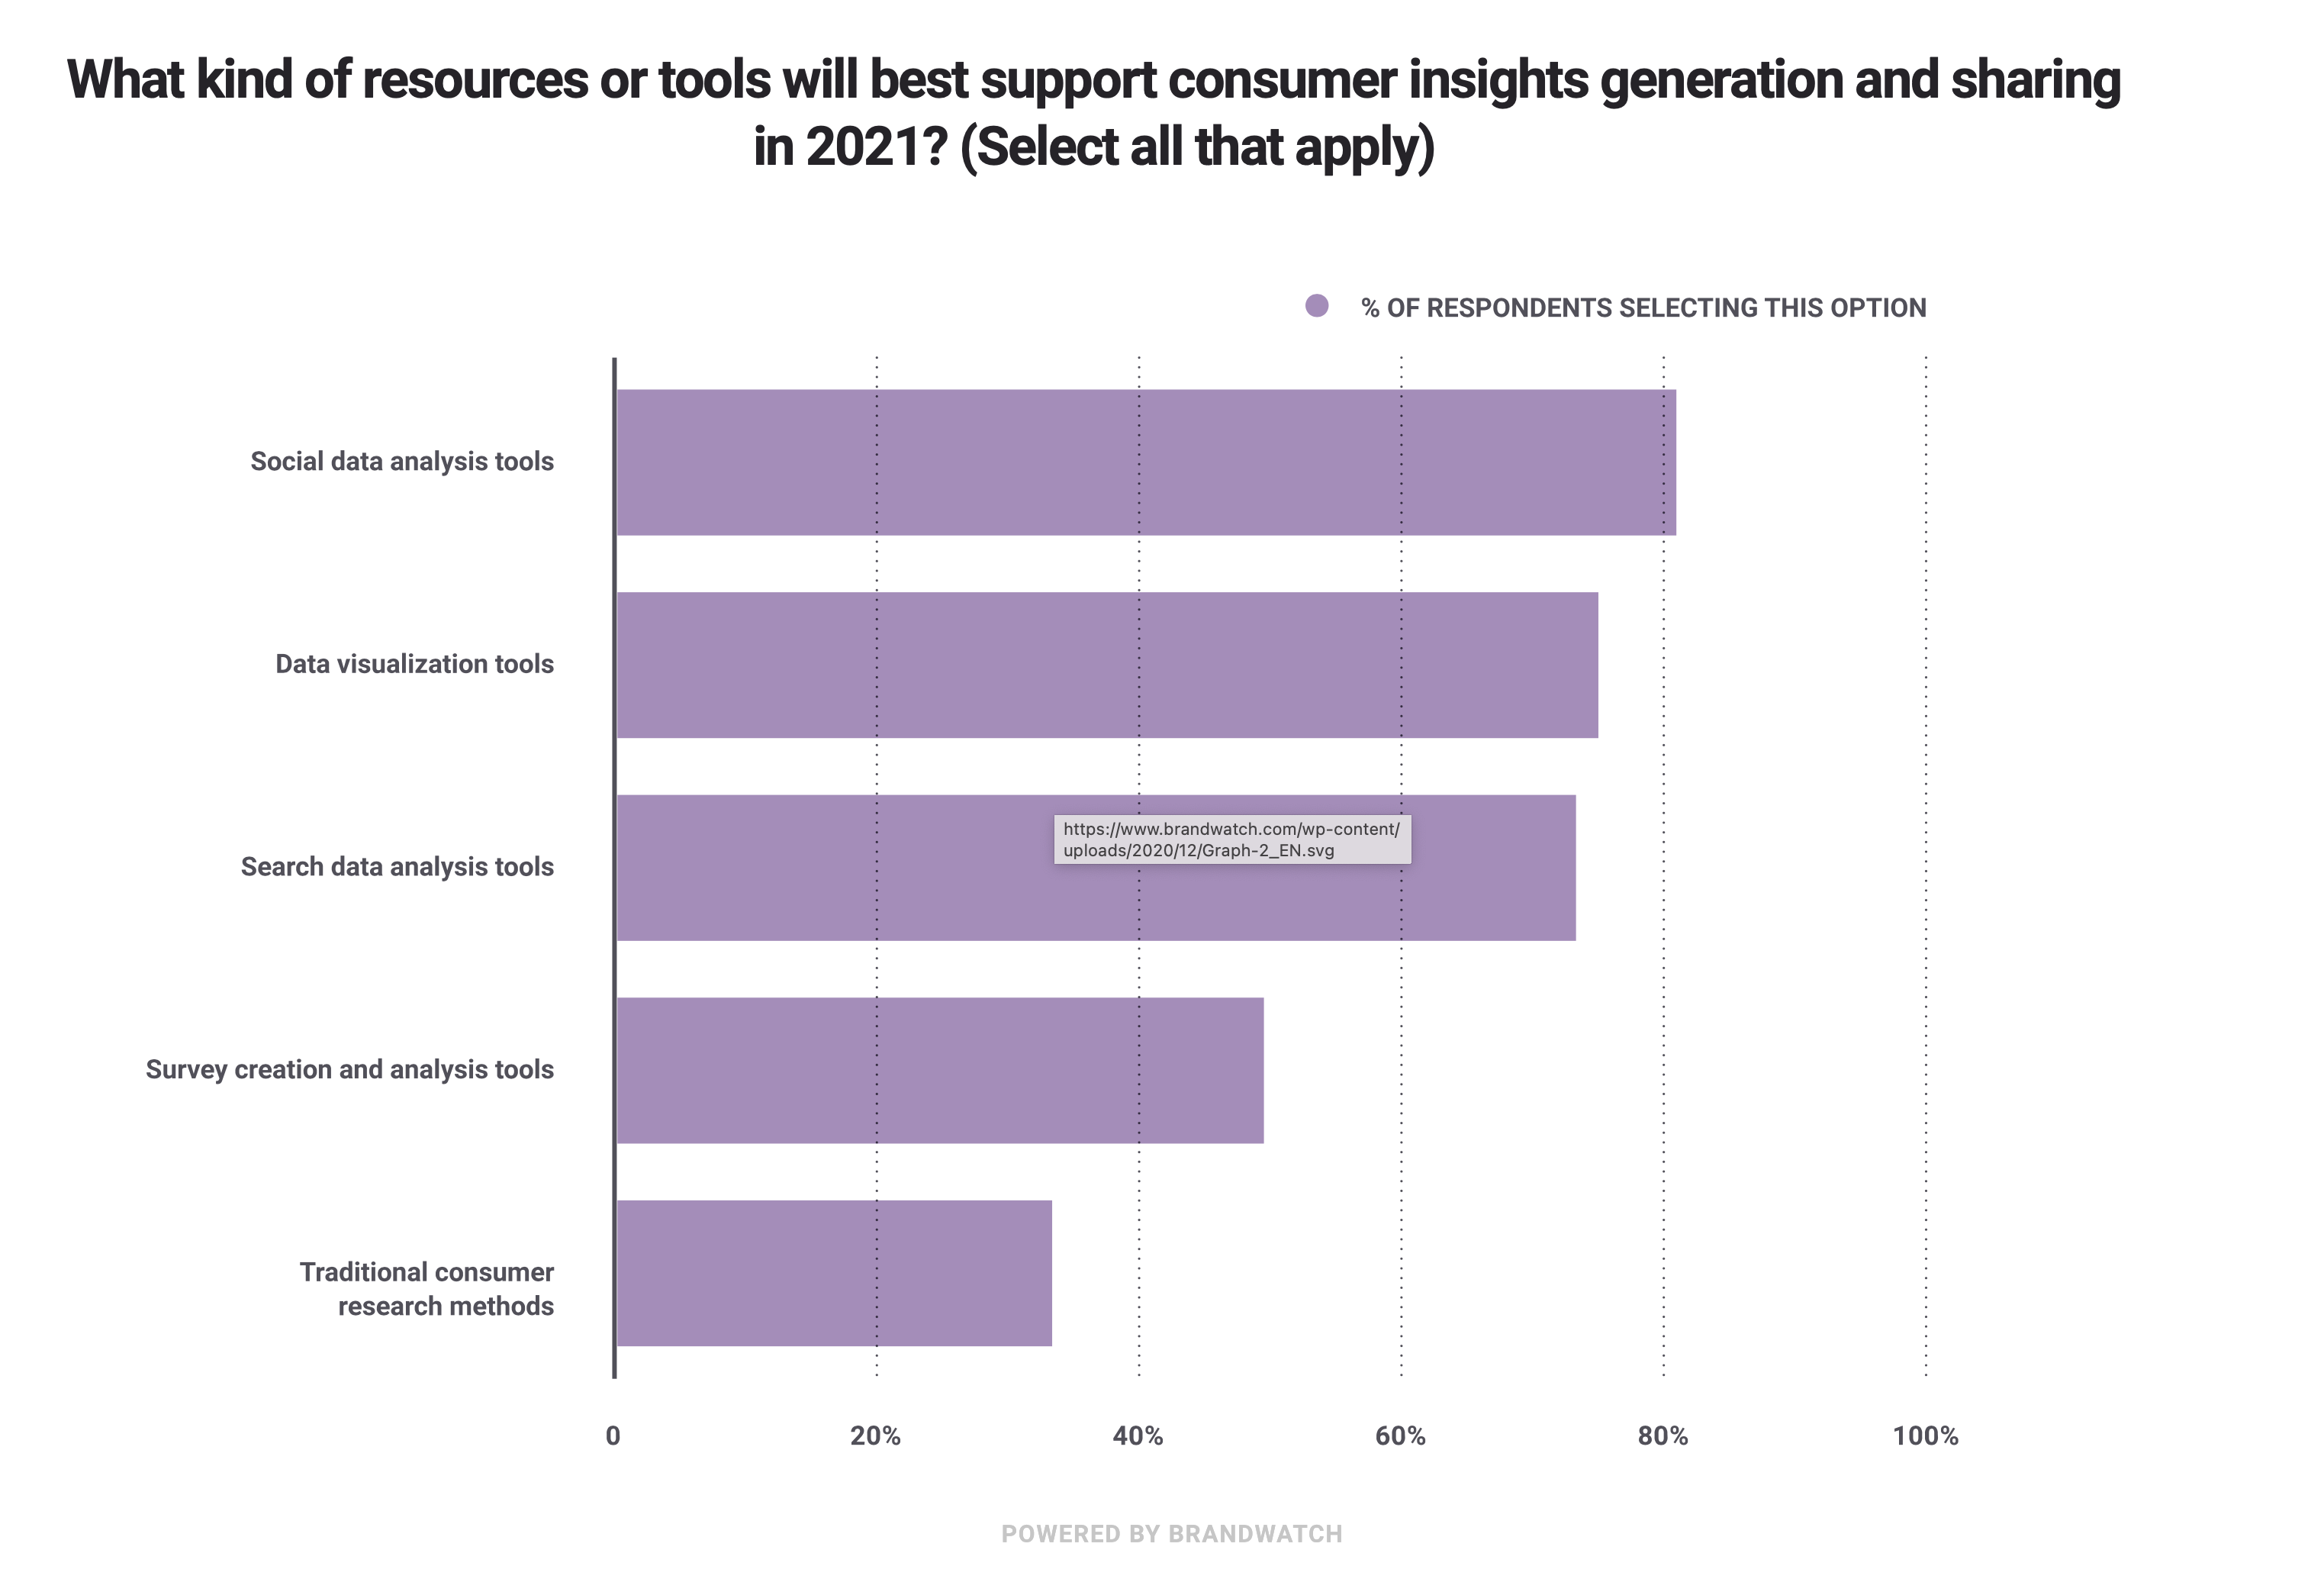 The most valuable tools for gaining customer insights in 2021